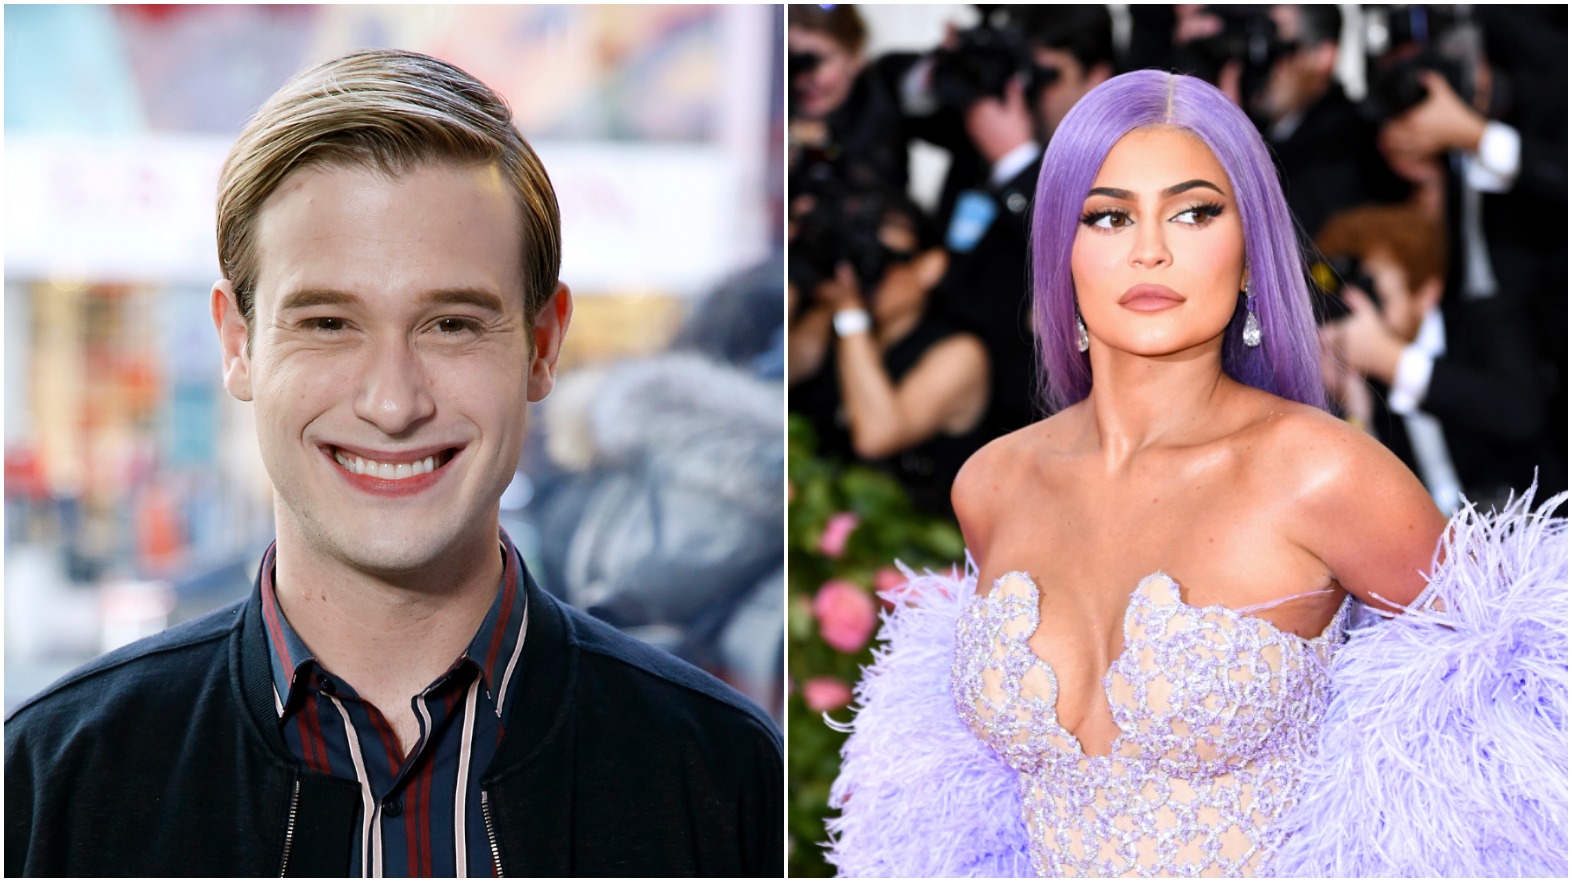 Medium Tyler Henry Predicts Kylie Jenner Will Have Baby No. 2 Soon